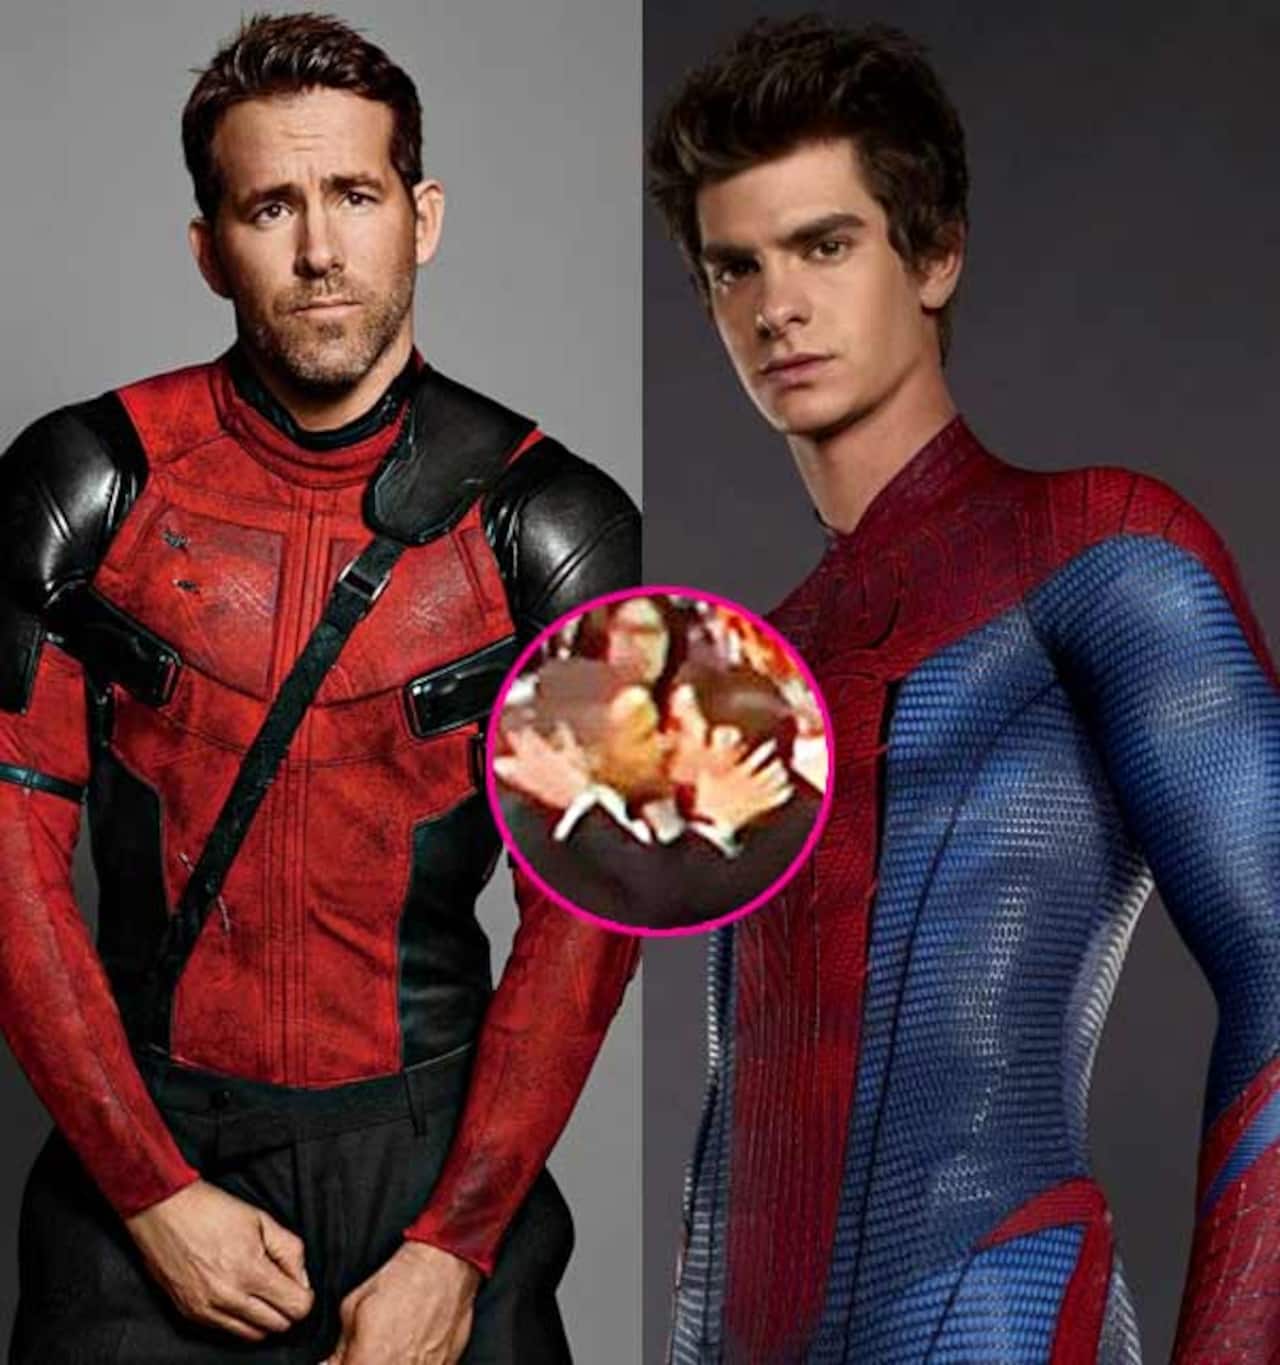 Spider-Man kisses Deadpool at the Golden Globes and we now want a crossover  movie ASAP - watch video - Bollywood News & Gossip, Movie Reviews, Trailers  & Videos at 